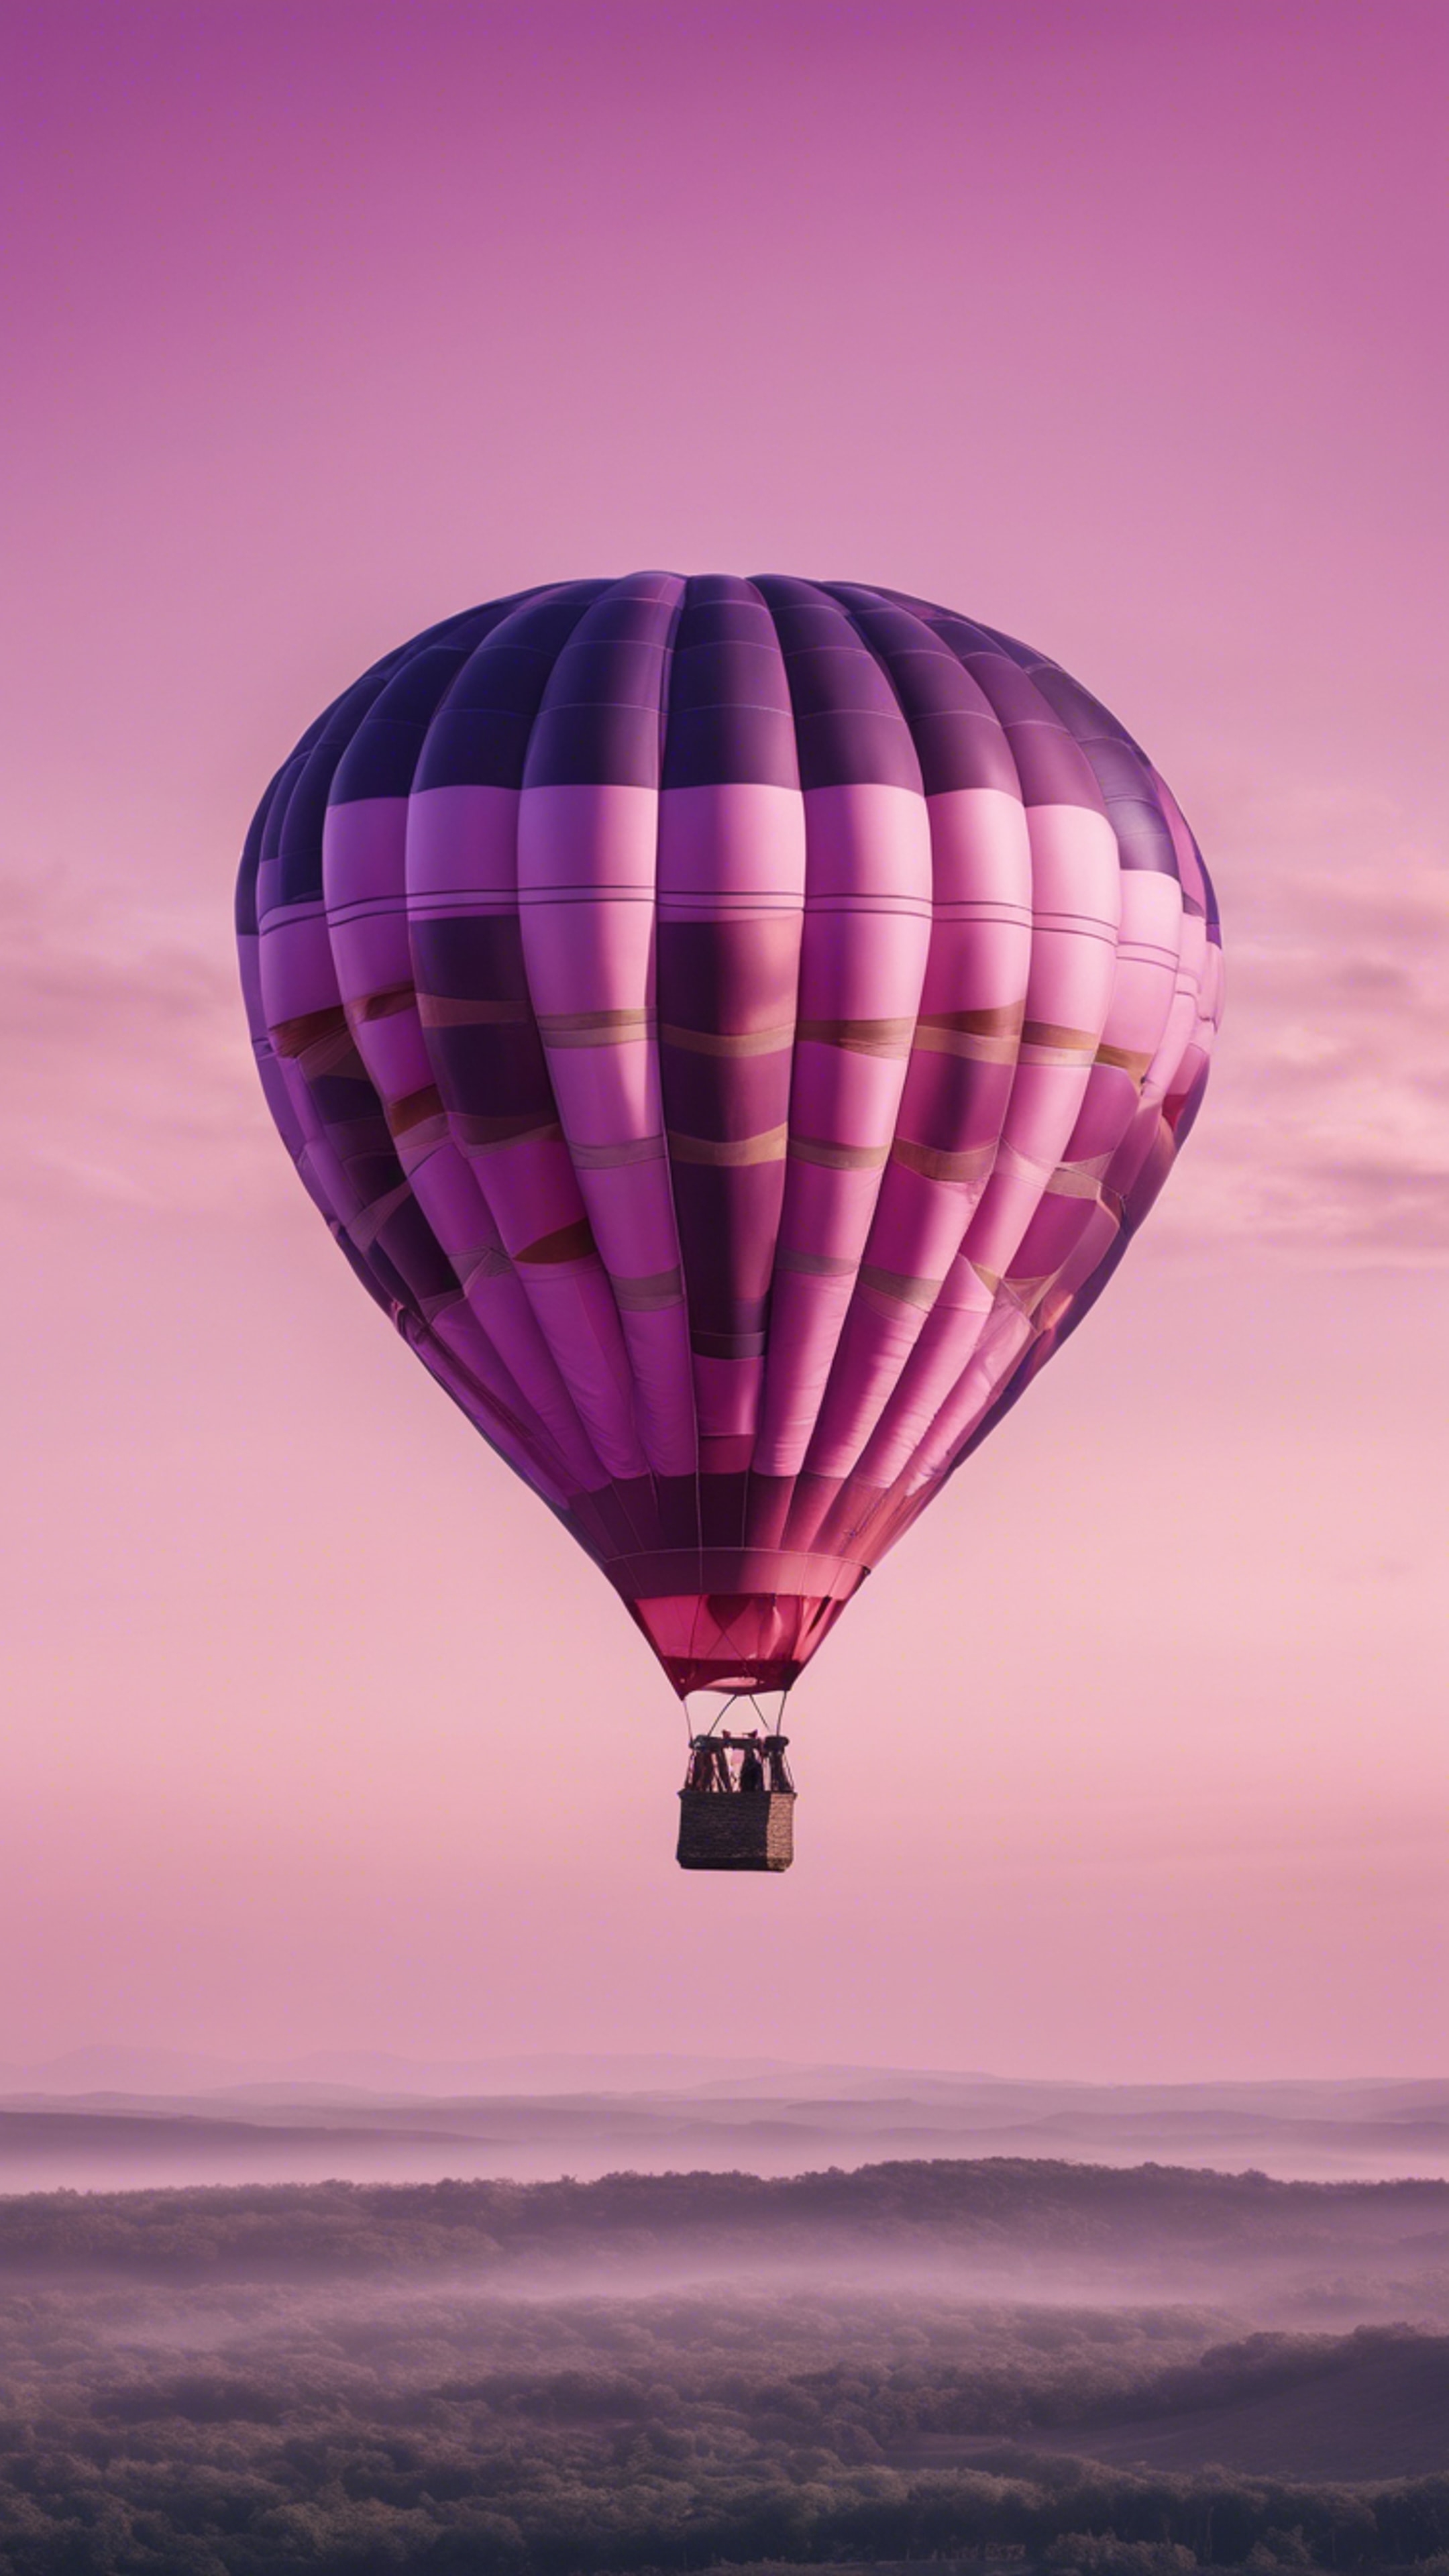 A pink and purple striped hot air balloon floating in a clear morning sky. Шпалери[24bb758d911f4cfb8c8f]